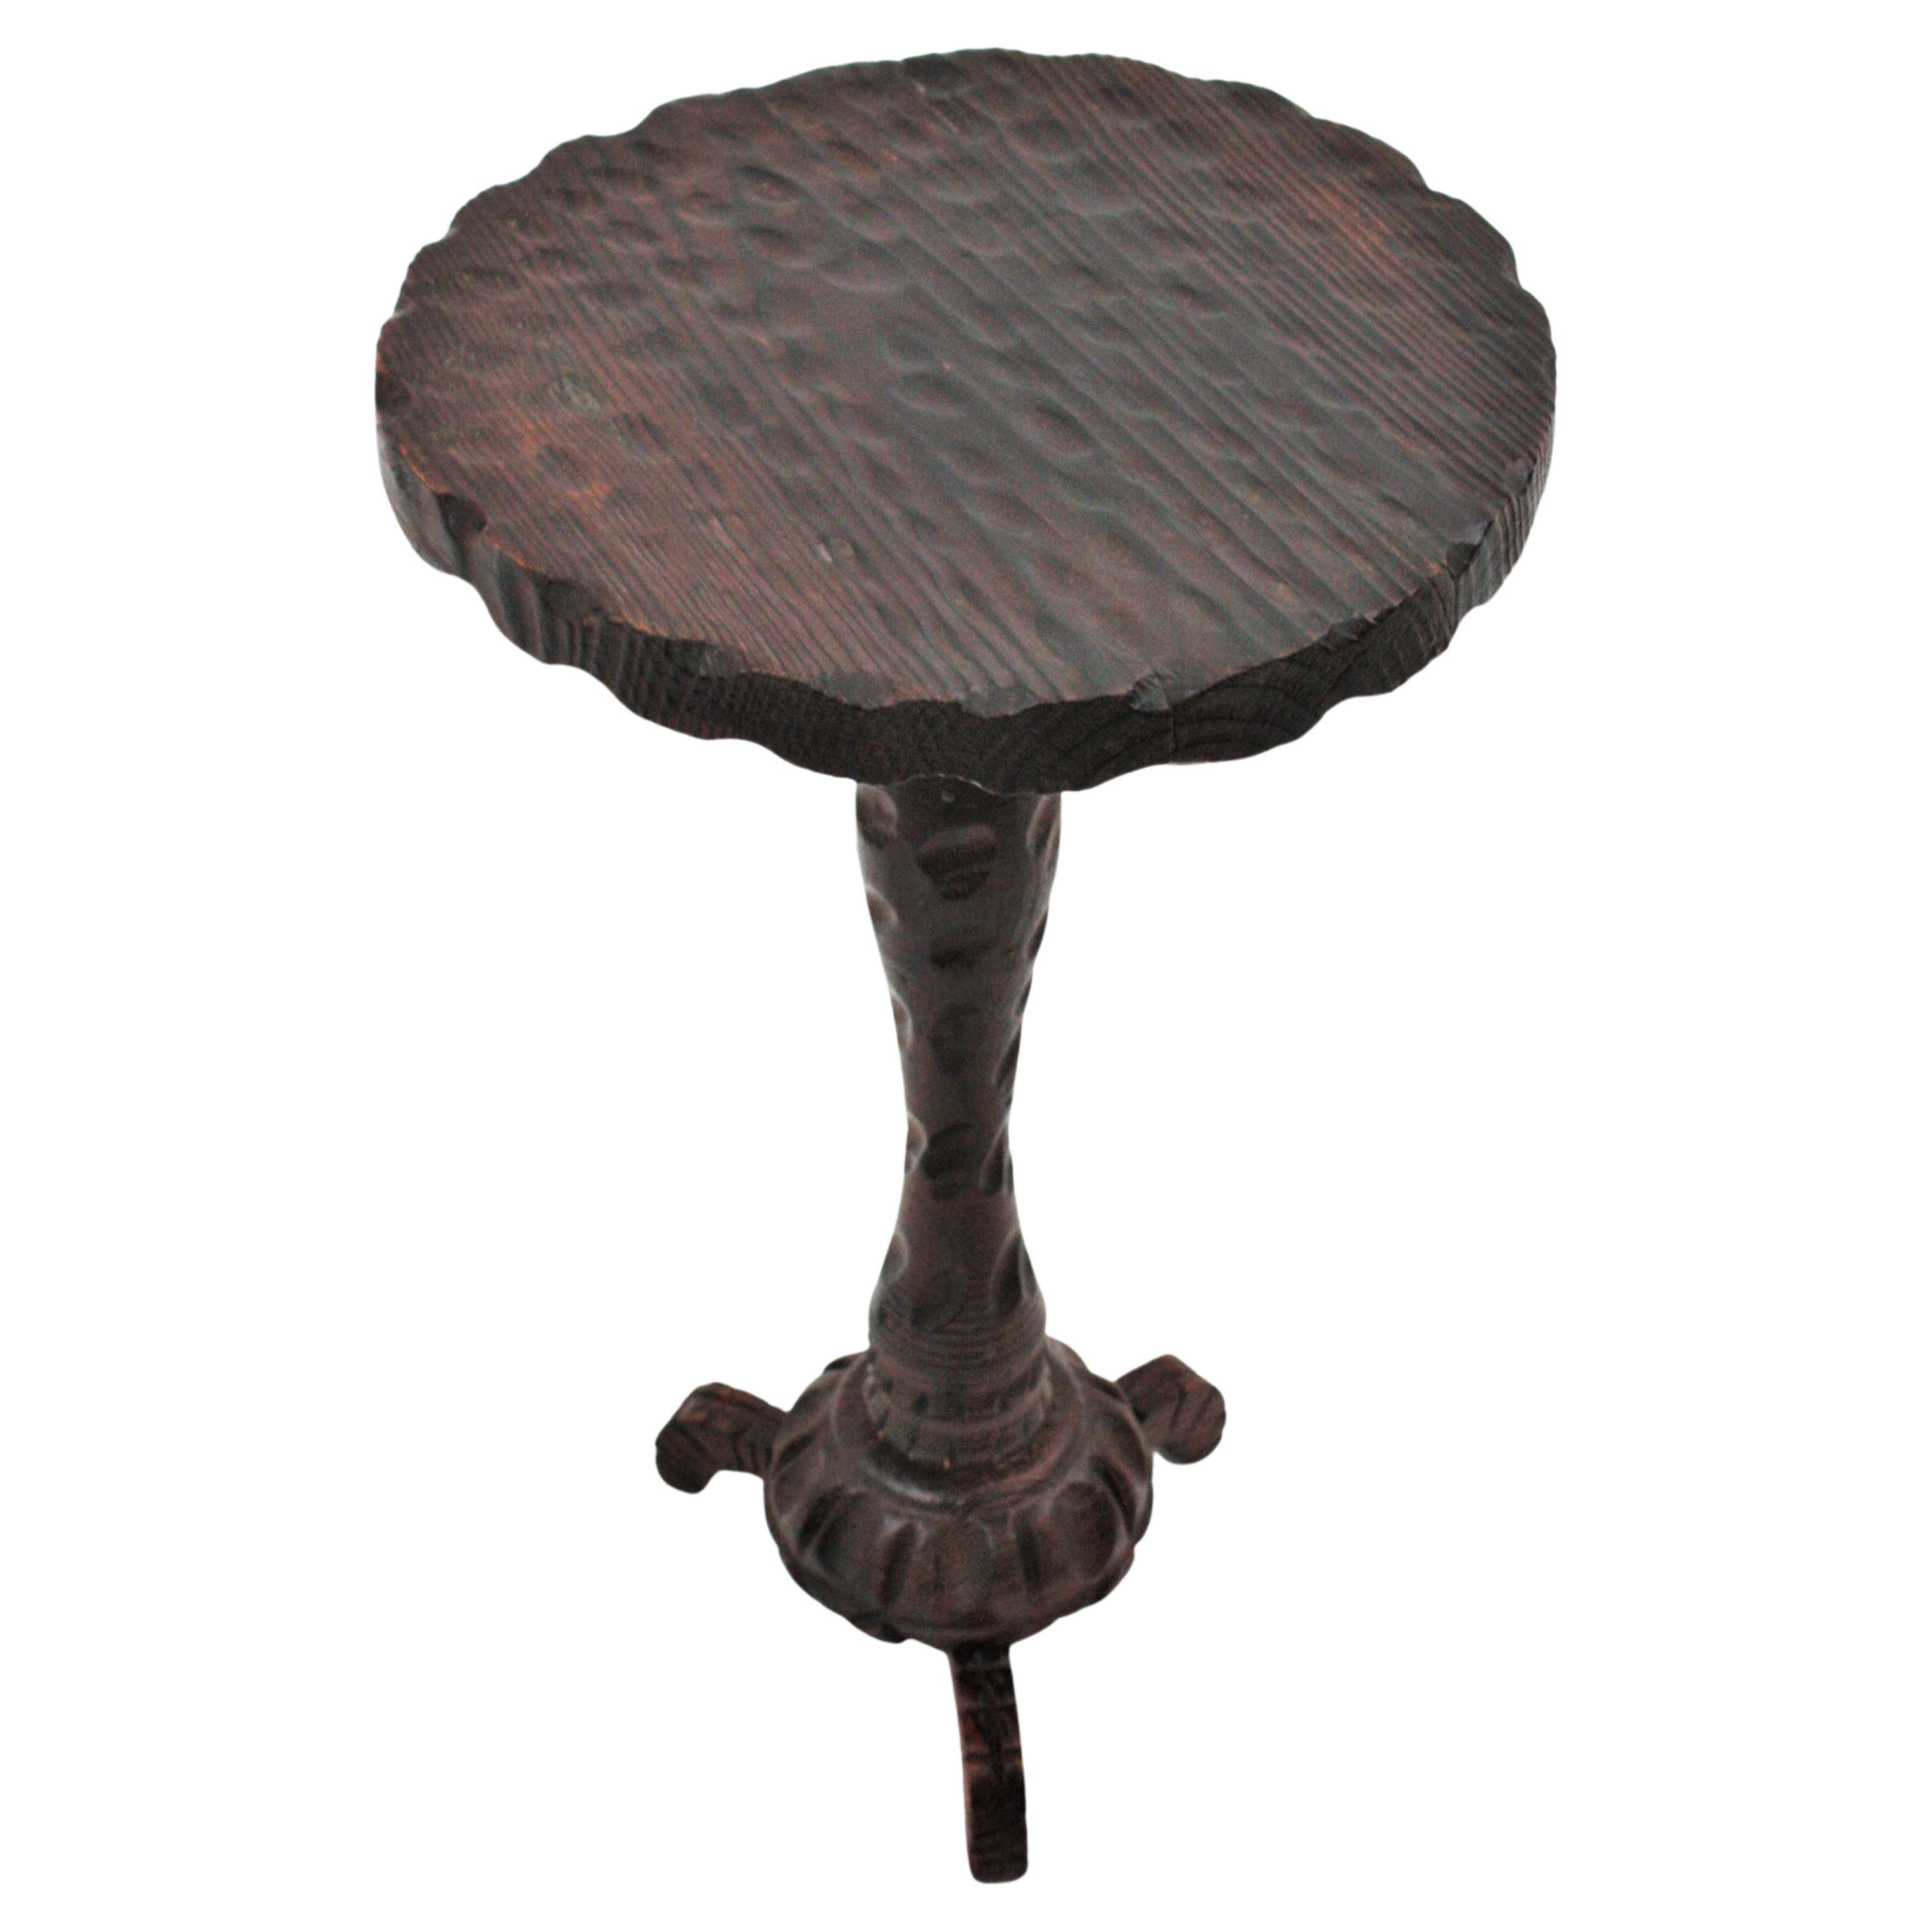 Handcarved pine wood gueridon table or occassional table standing on tripod base. Spain, 1940s.
The tabletop in round shape has scalloped details on the edge and beautiful carvings thorough. It is supported on a wood stem with scalloped details and